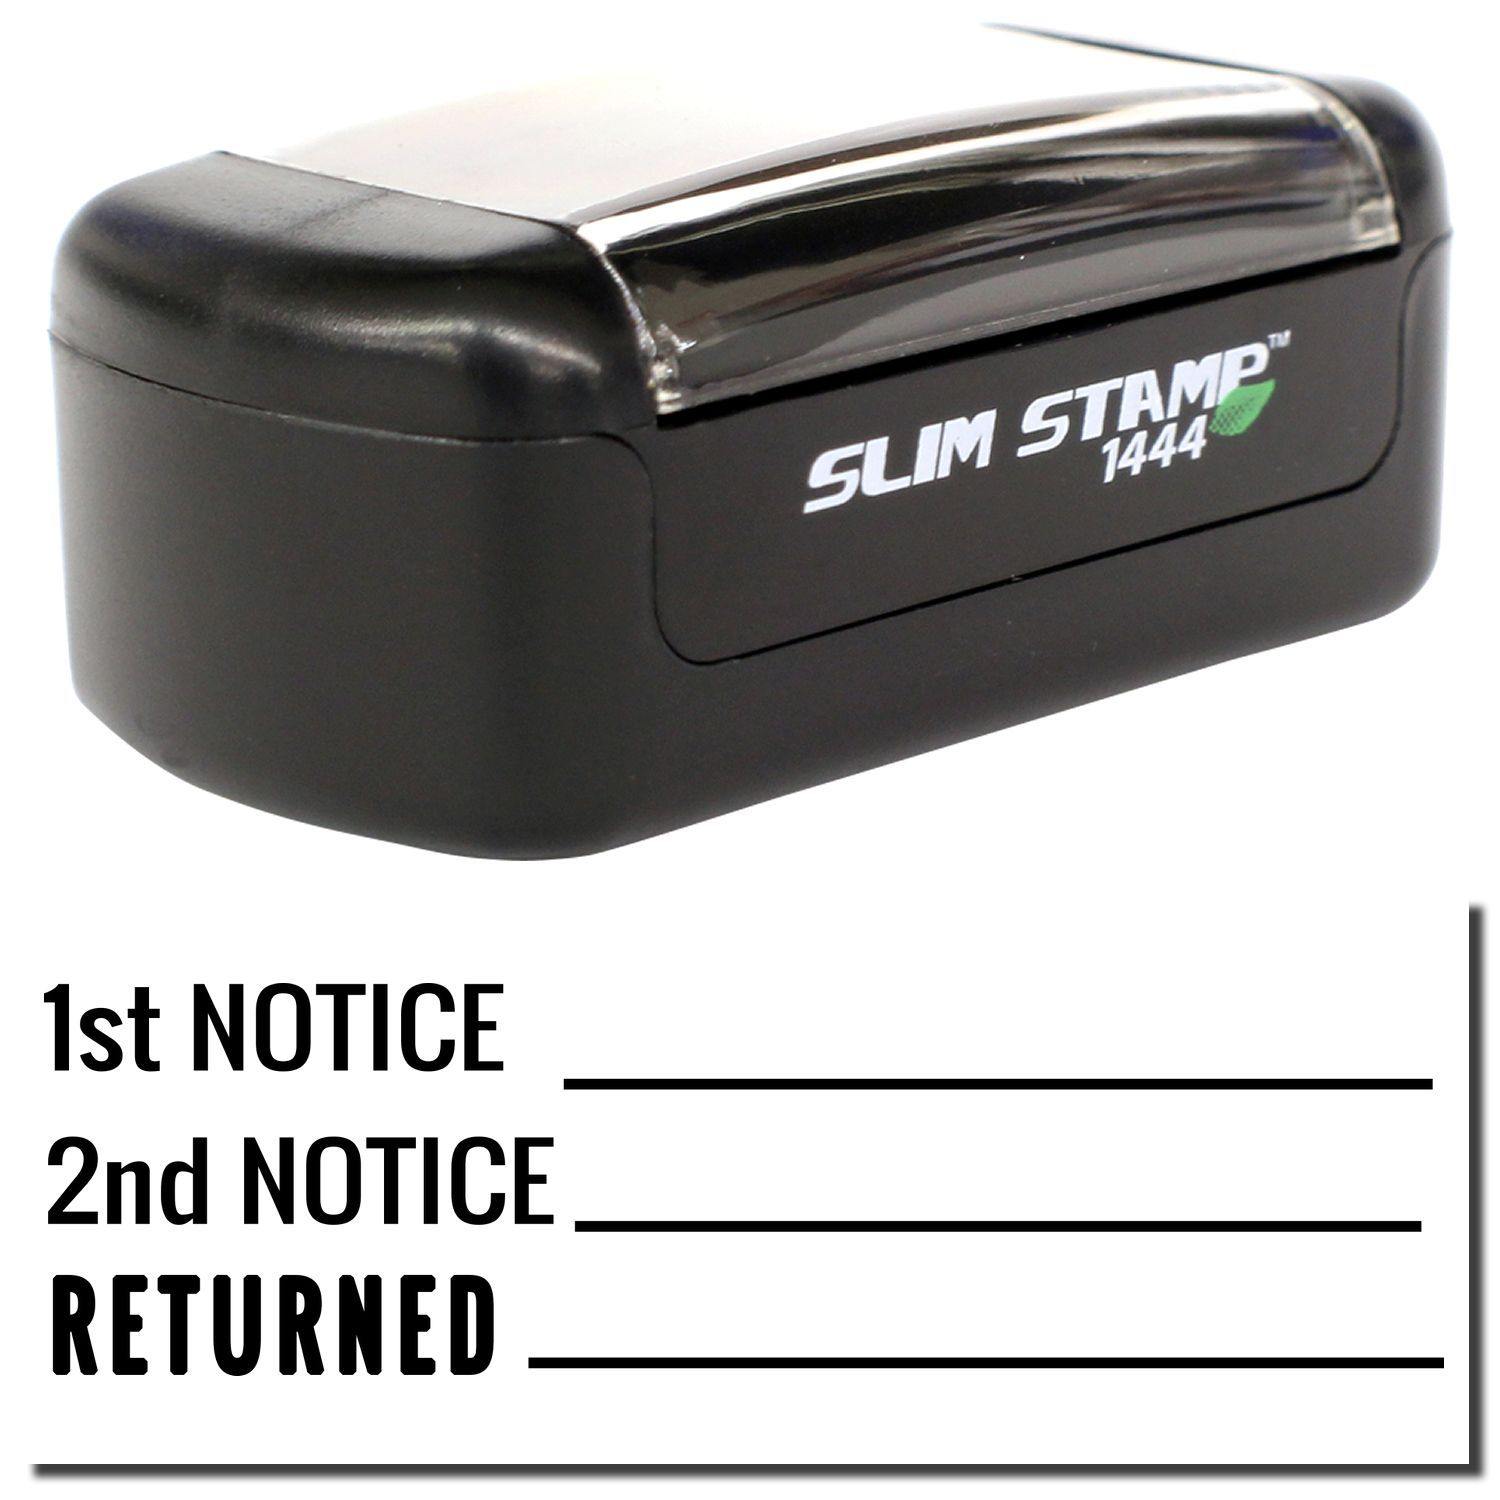 A stock office pre-inked stamp with a stamped image showing how the texts "1st NOTICE", "2nd NOTICE", and "RETURNED" with lines are displayed after stamping.